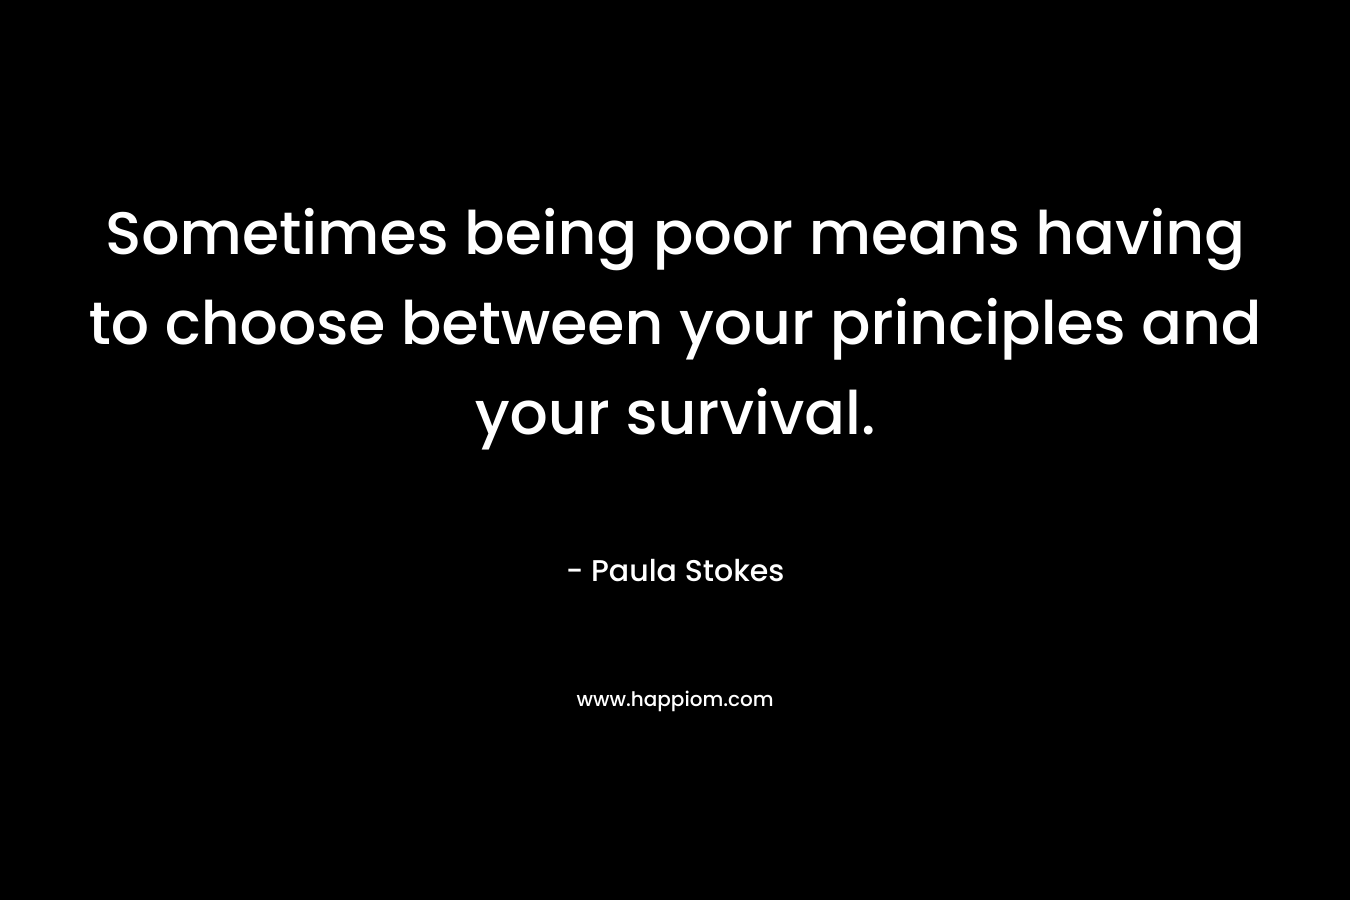 Sometimes being poor means having to choose between your principles and your survival.